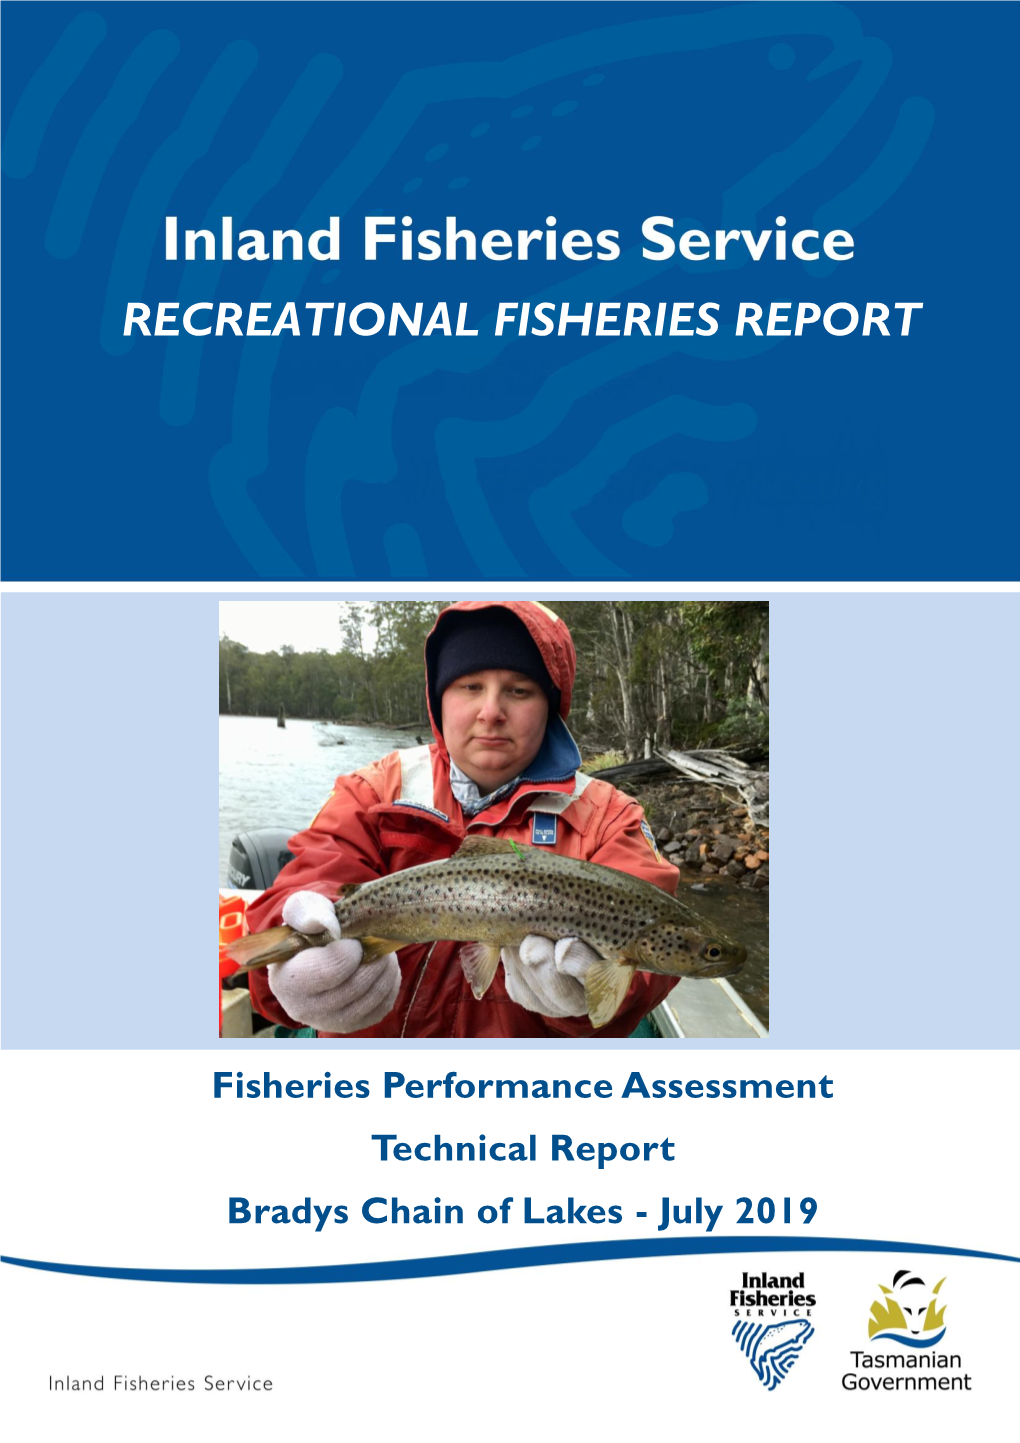 Fisheries Performance Assessment Technical Report Bradys Chain of Lakes - July 2019